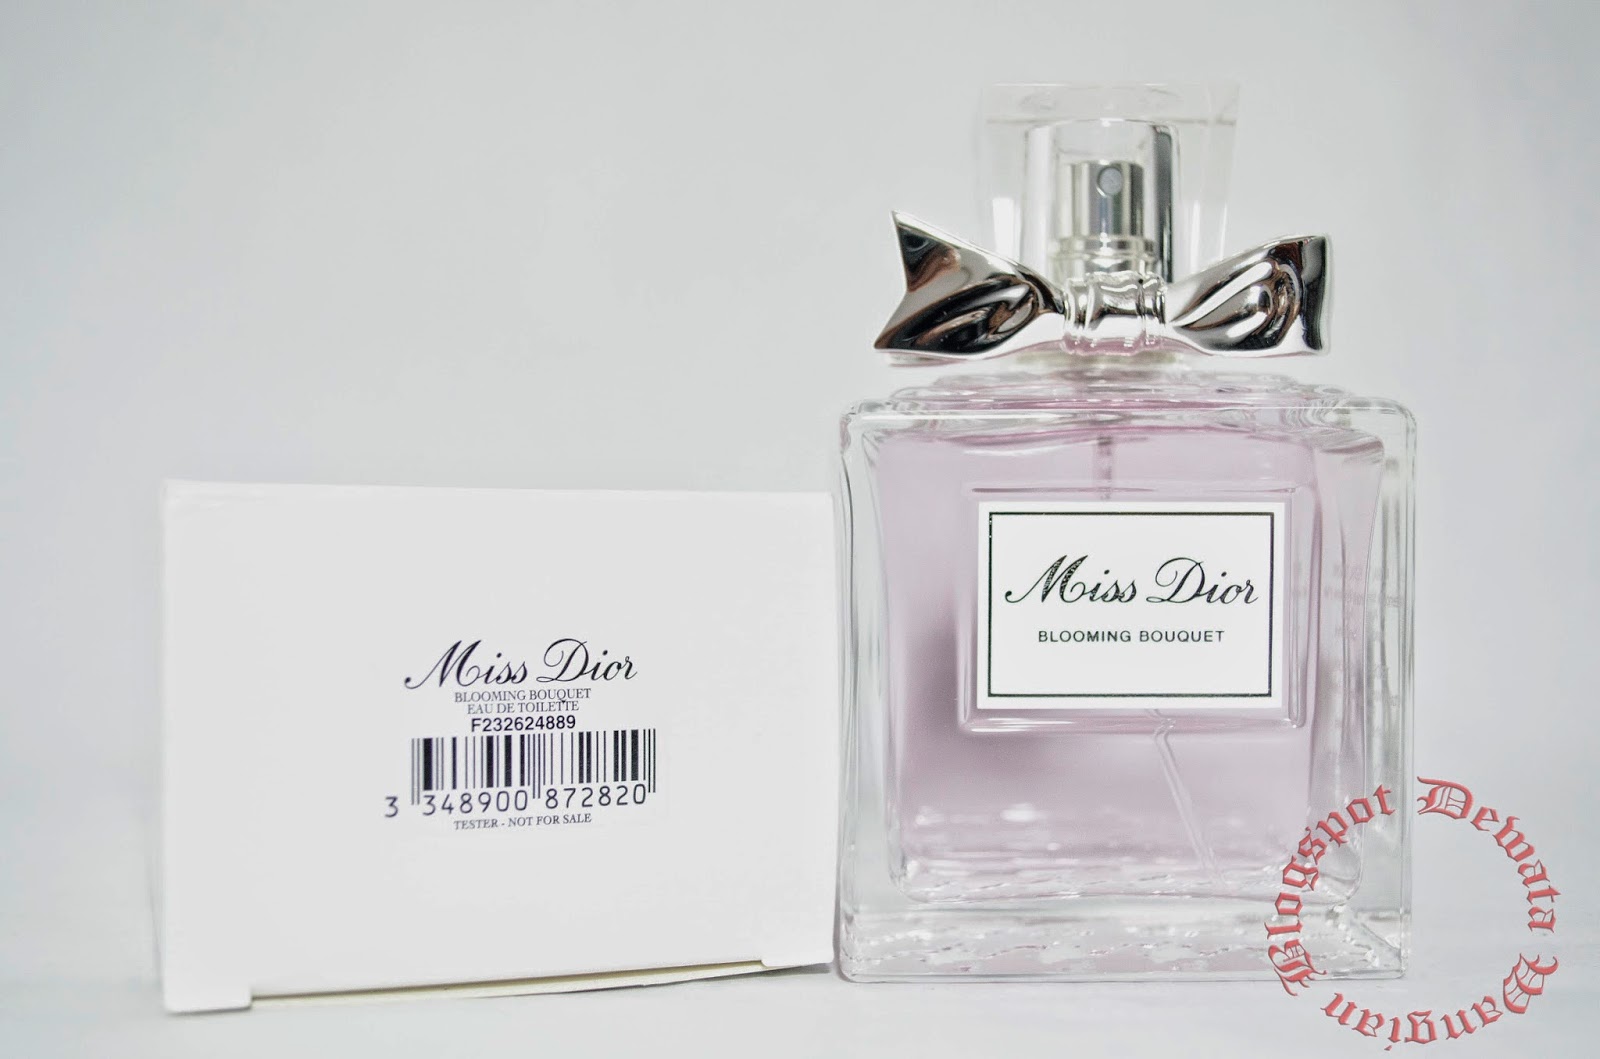 tester miss dior blooming bouquet